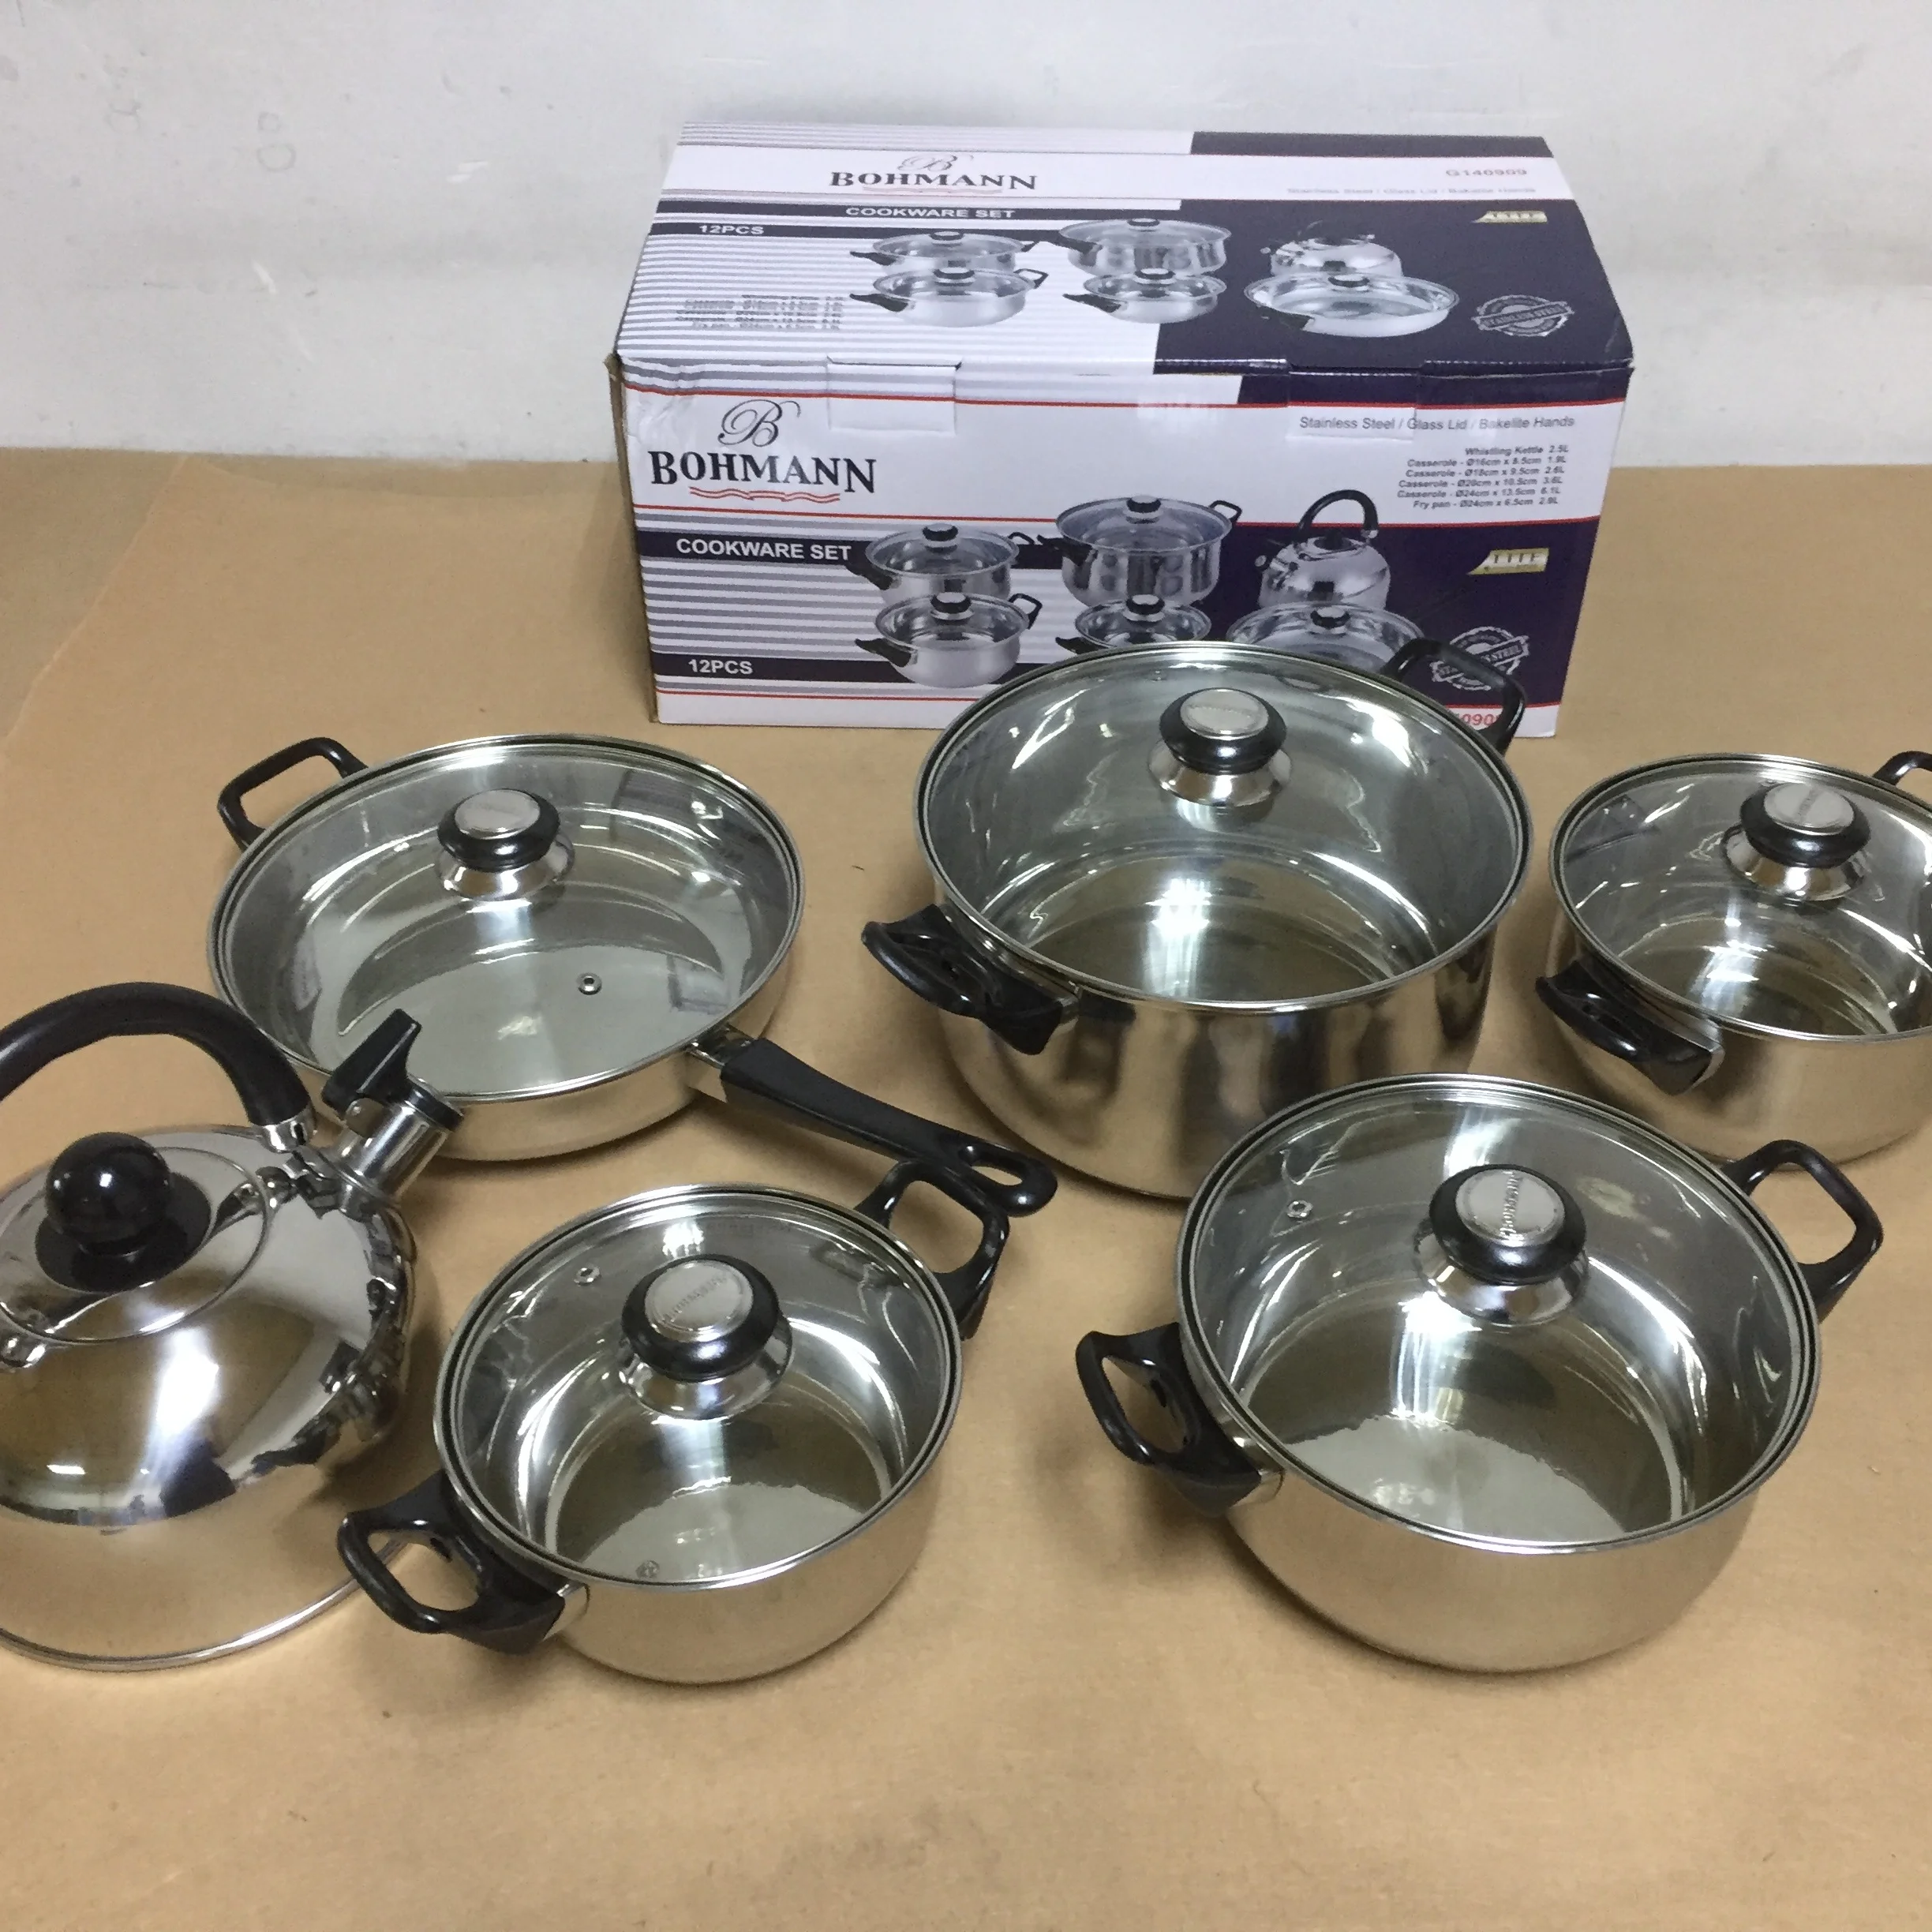 cook pro 7 piece 18 10 stainless steel cookware set